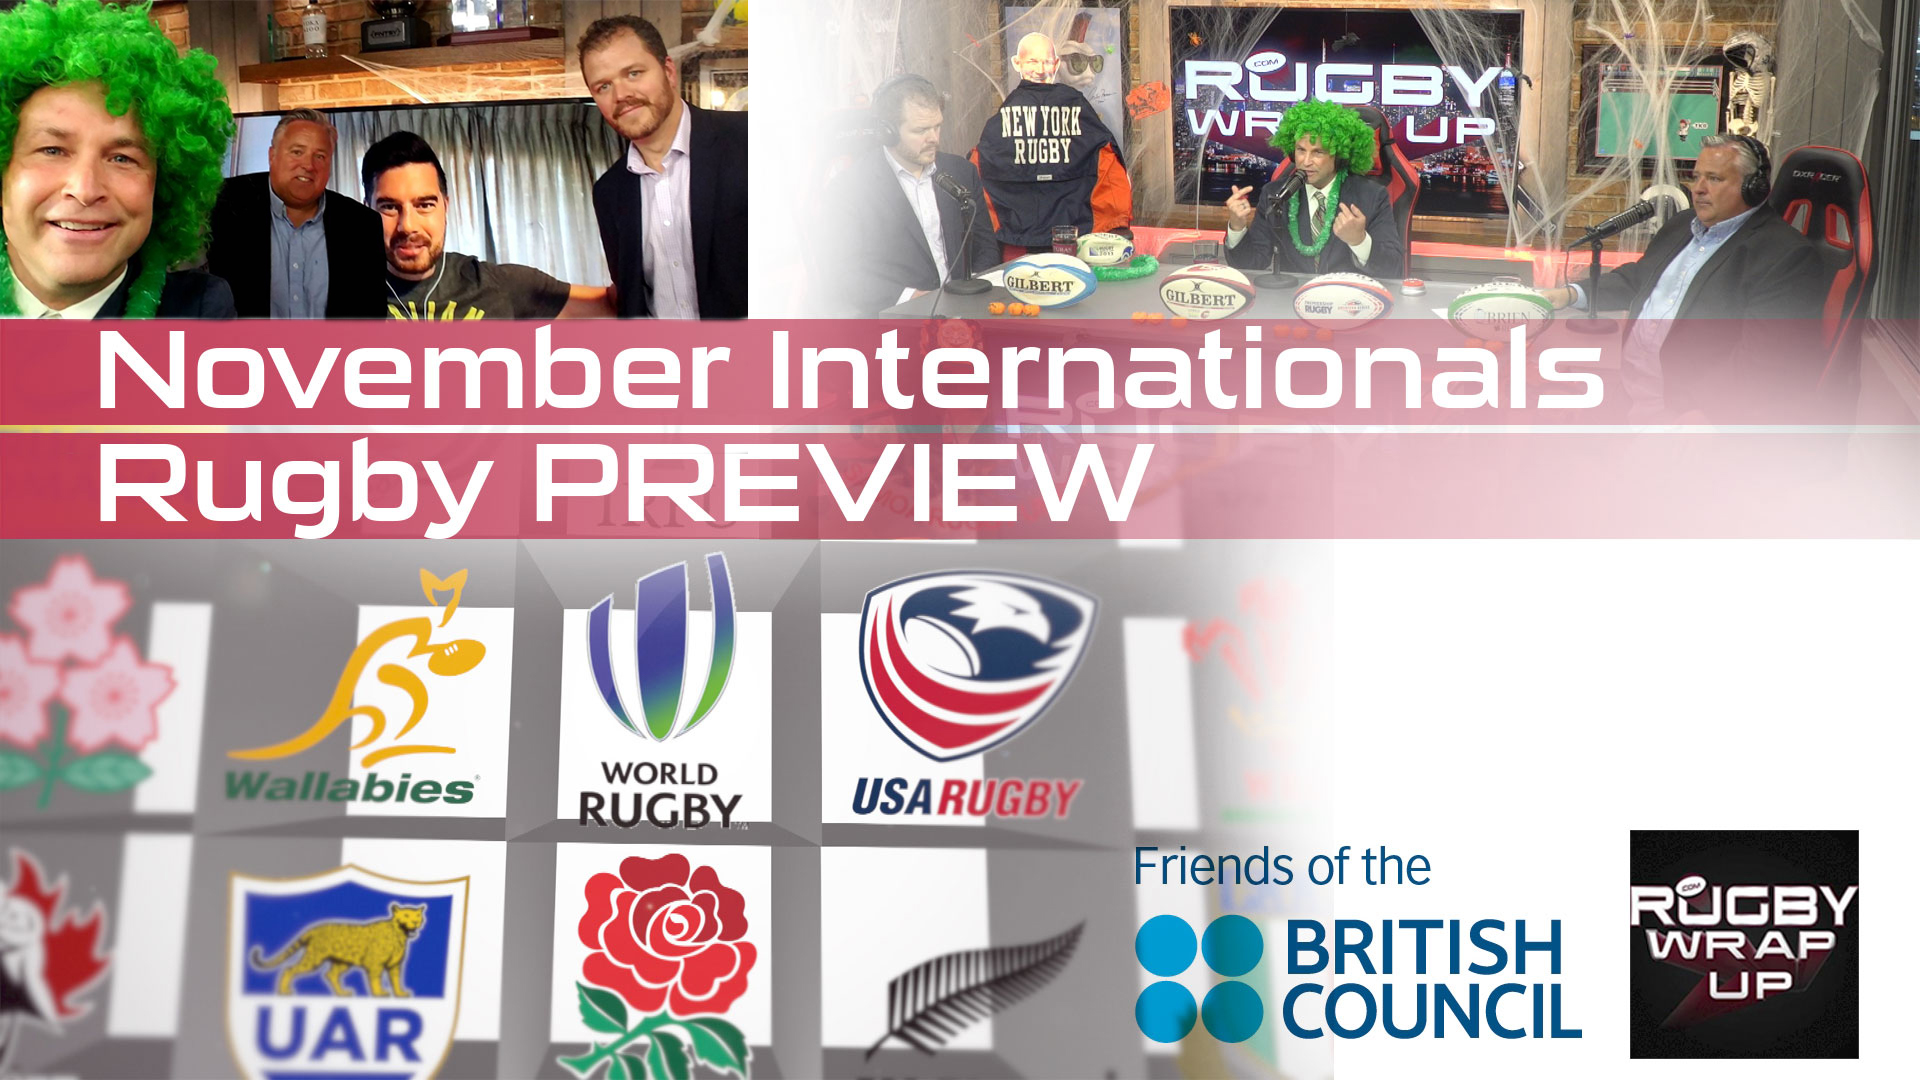 STUDIO SHOW: Pengelly, Wall, Broker: November Tests, RWC 2023 Hosts, USA Rugby Coaches